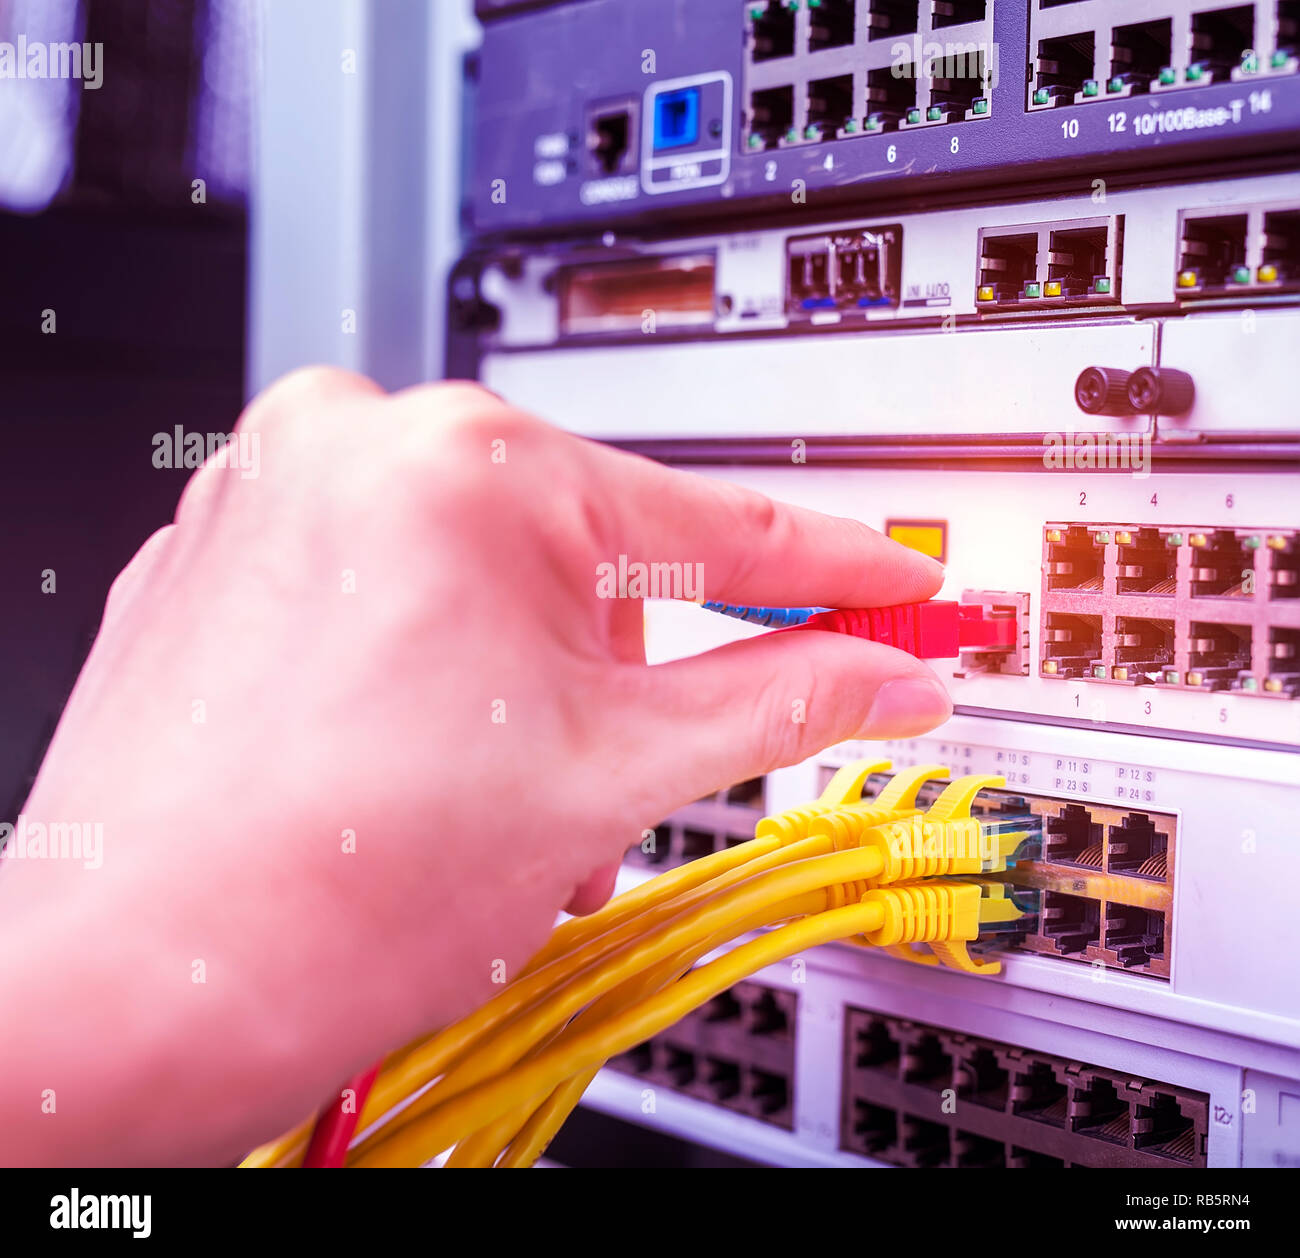 hand with network cables connected to servers in datacenter Stock Photo